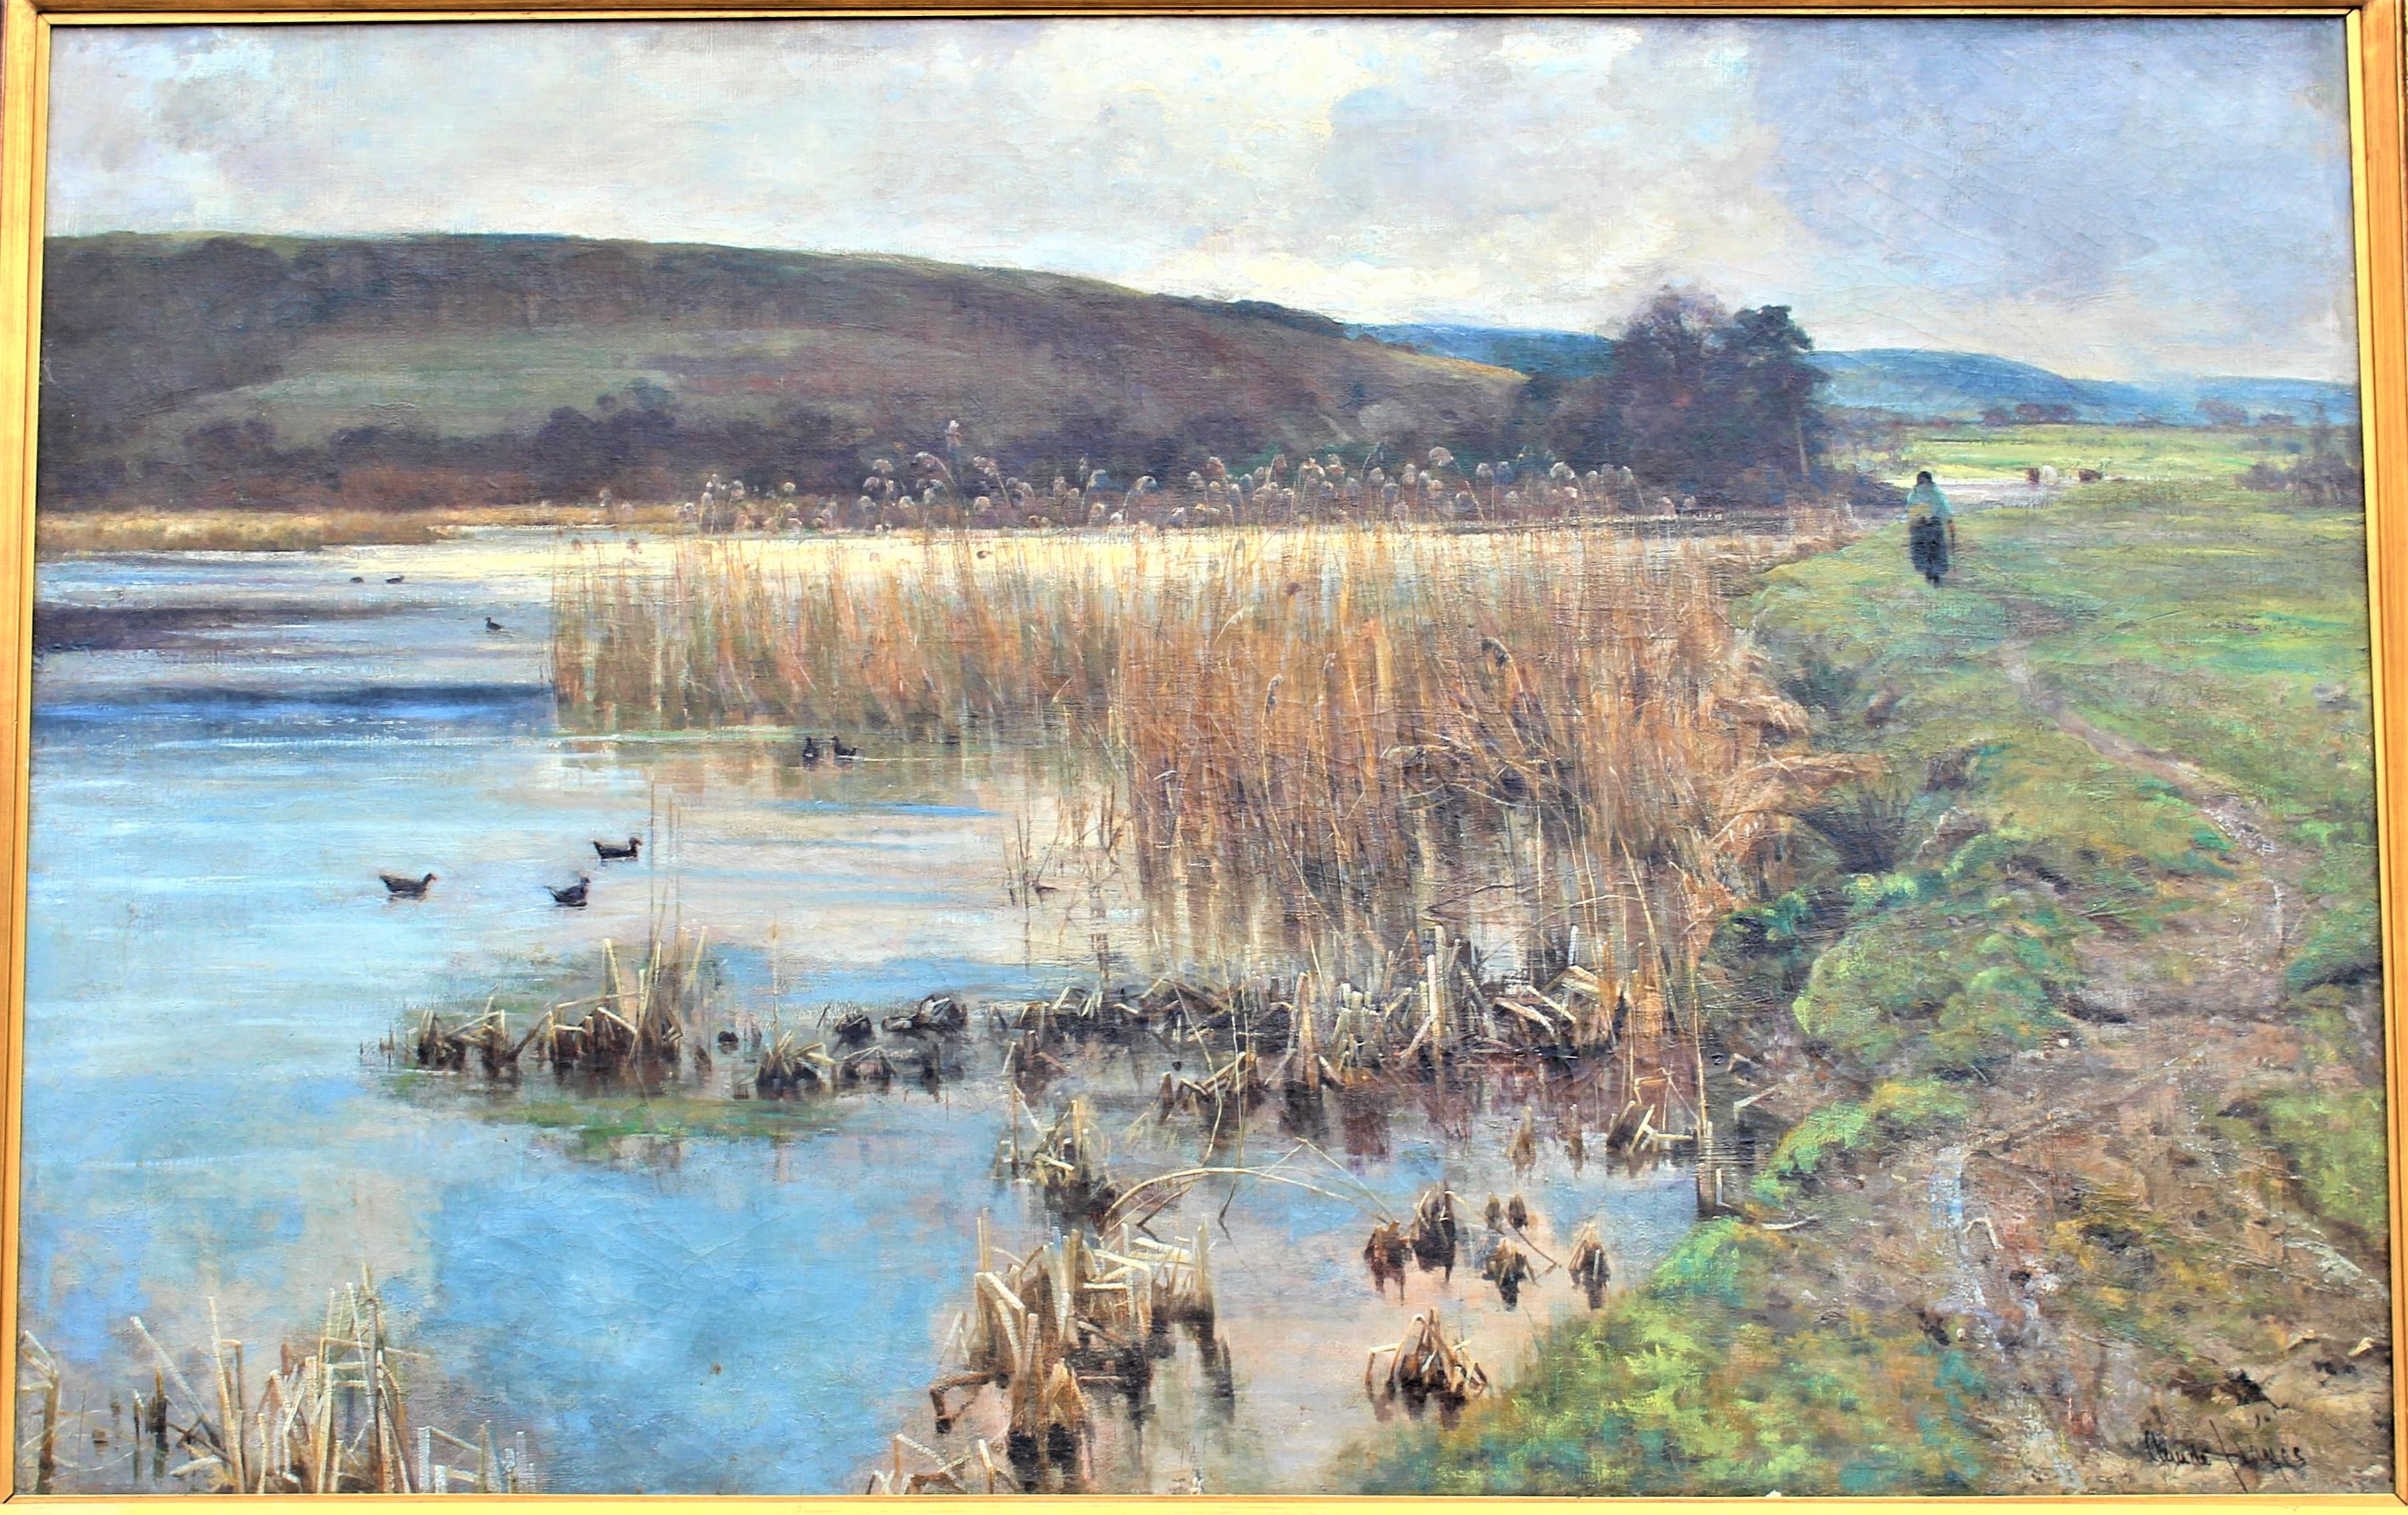 Done in England in the middle of the Victorian Period, this very substantial original oil painting on canvas is done by noted British artist Claude Hayes. The painting depicts a marsh scene in the foreground with a woman walking along a pathway of